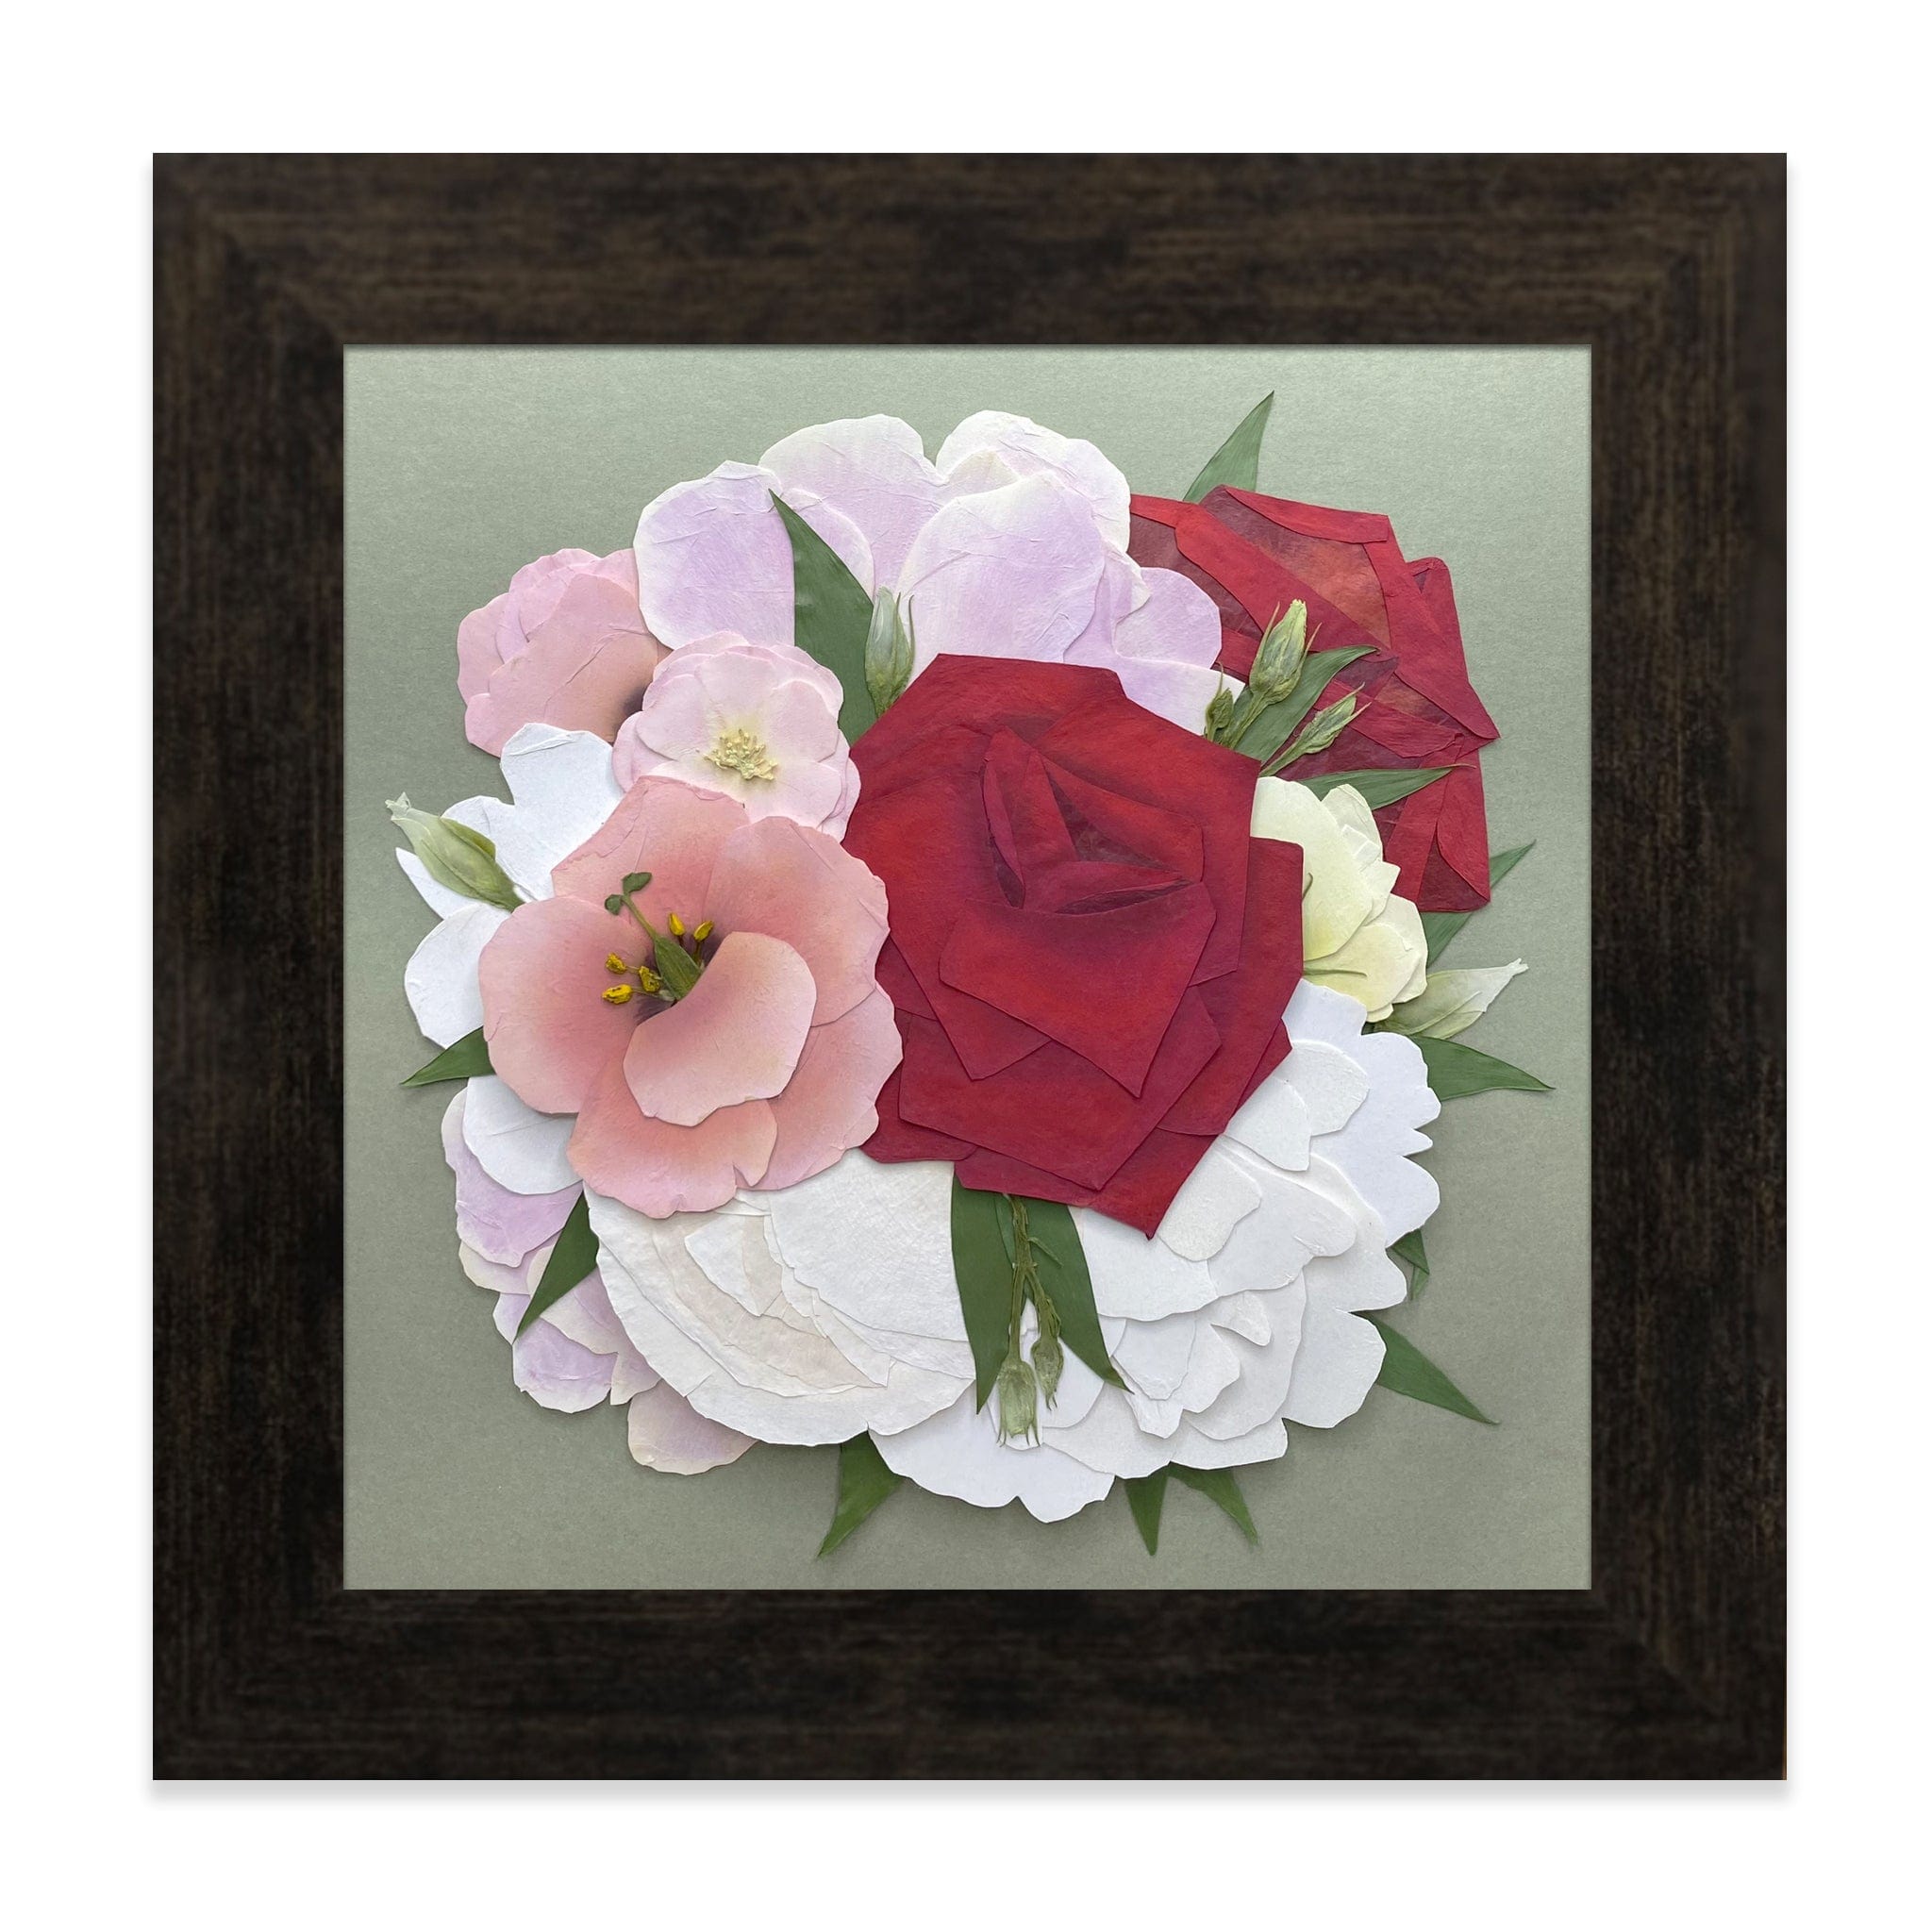 Pressed (Framed) 8" x 8" / Square / Small 8" x 8" Classic Frame Wedding Bouquet Preservation - DBAndrea